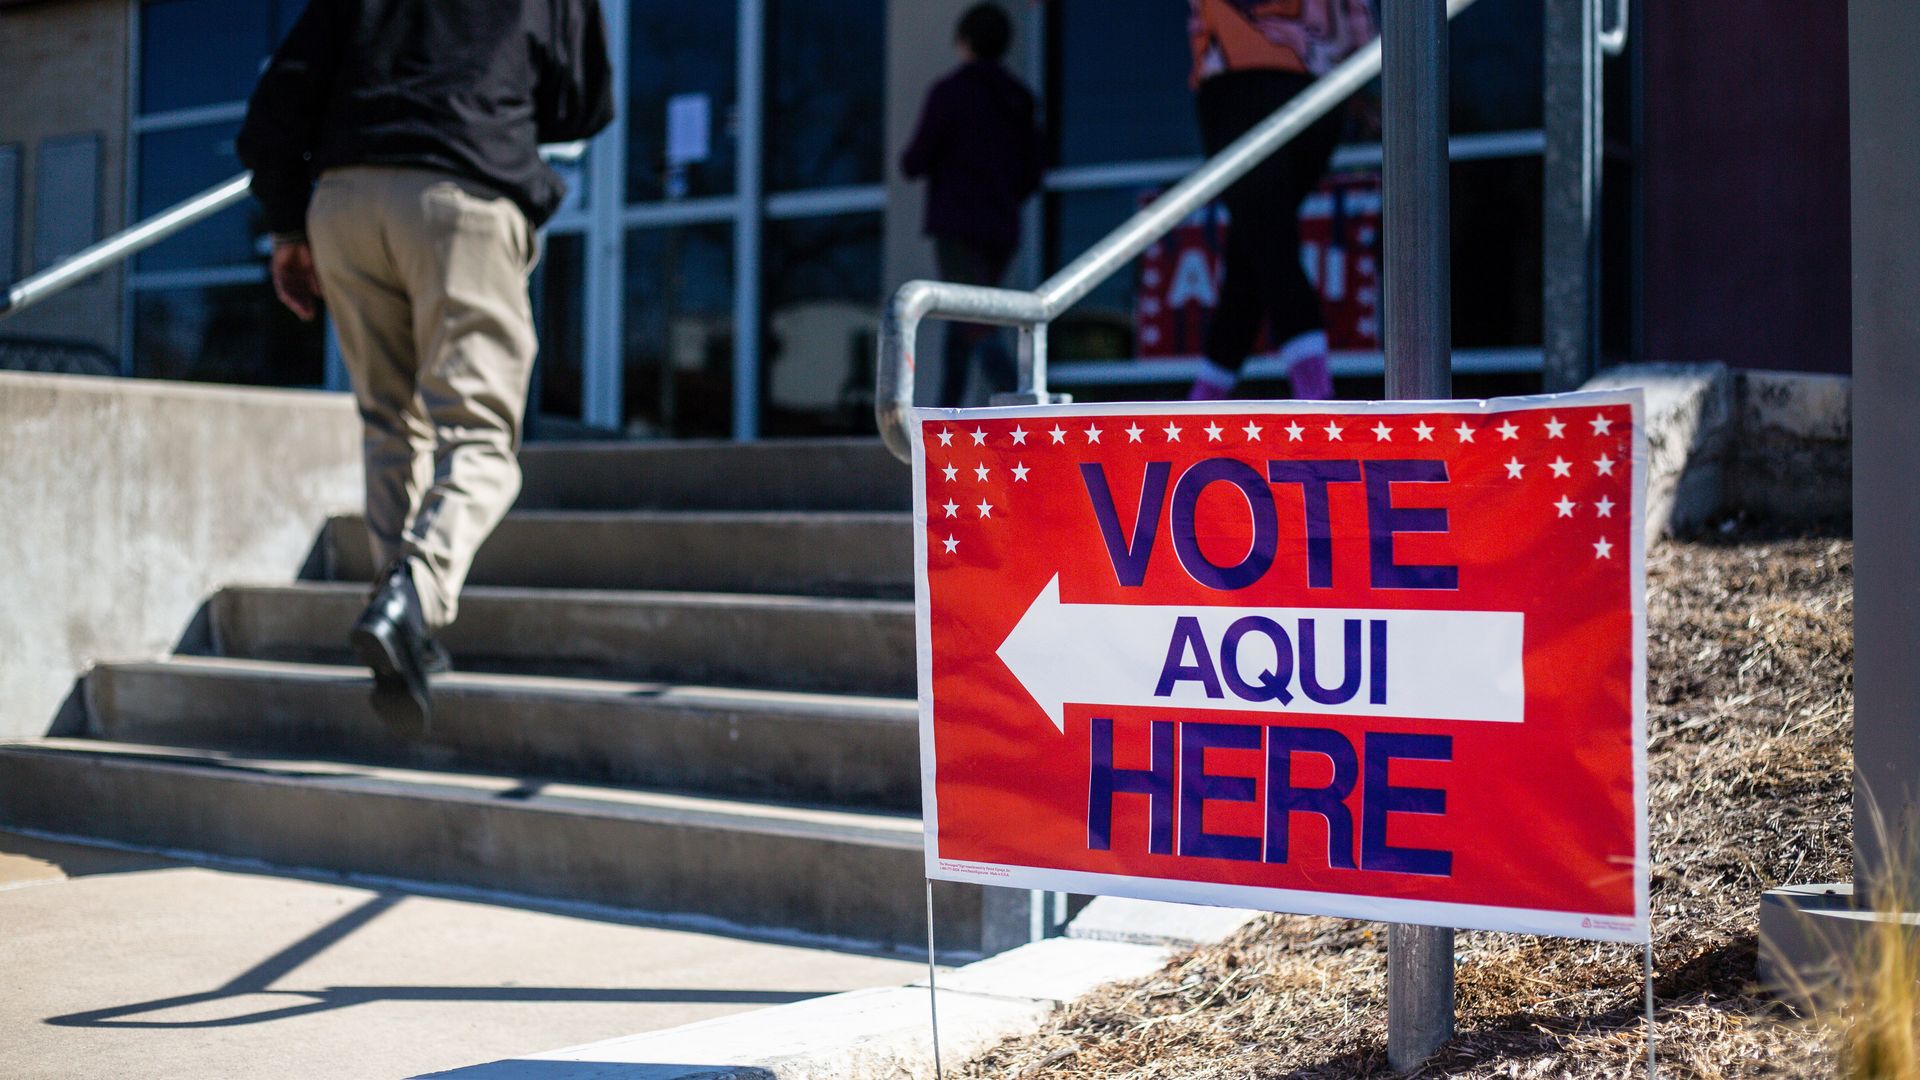 Photo of a red sign that says "Vote aqui here" next to a building